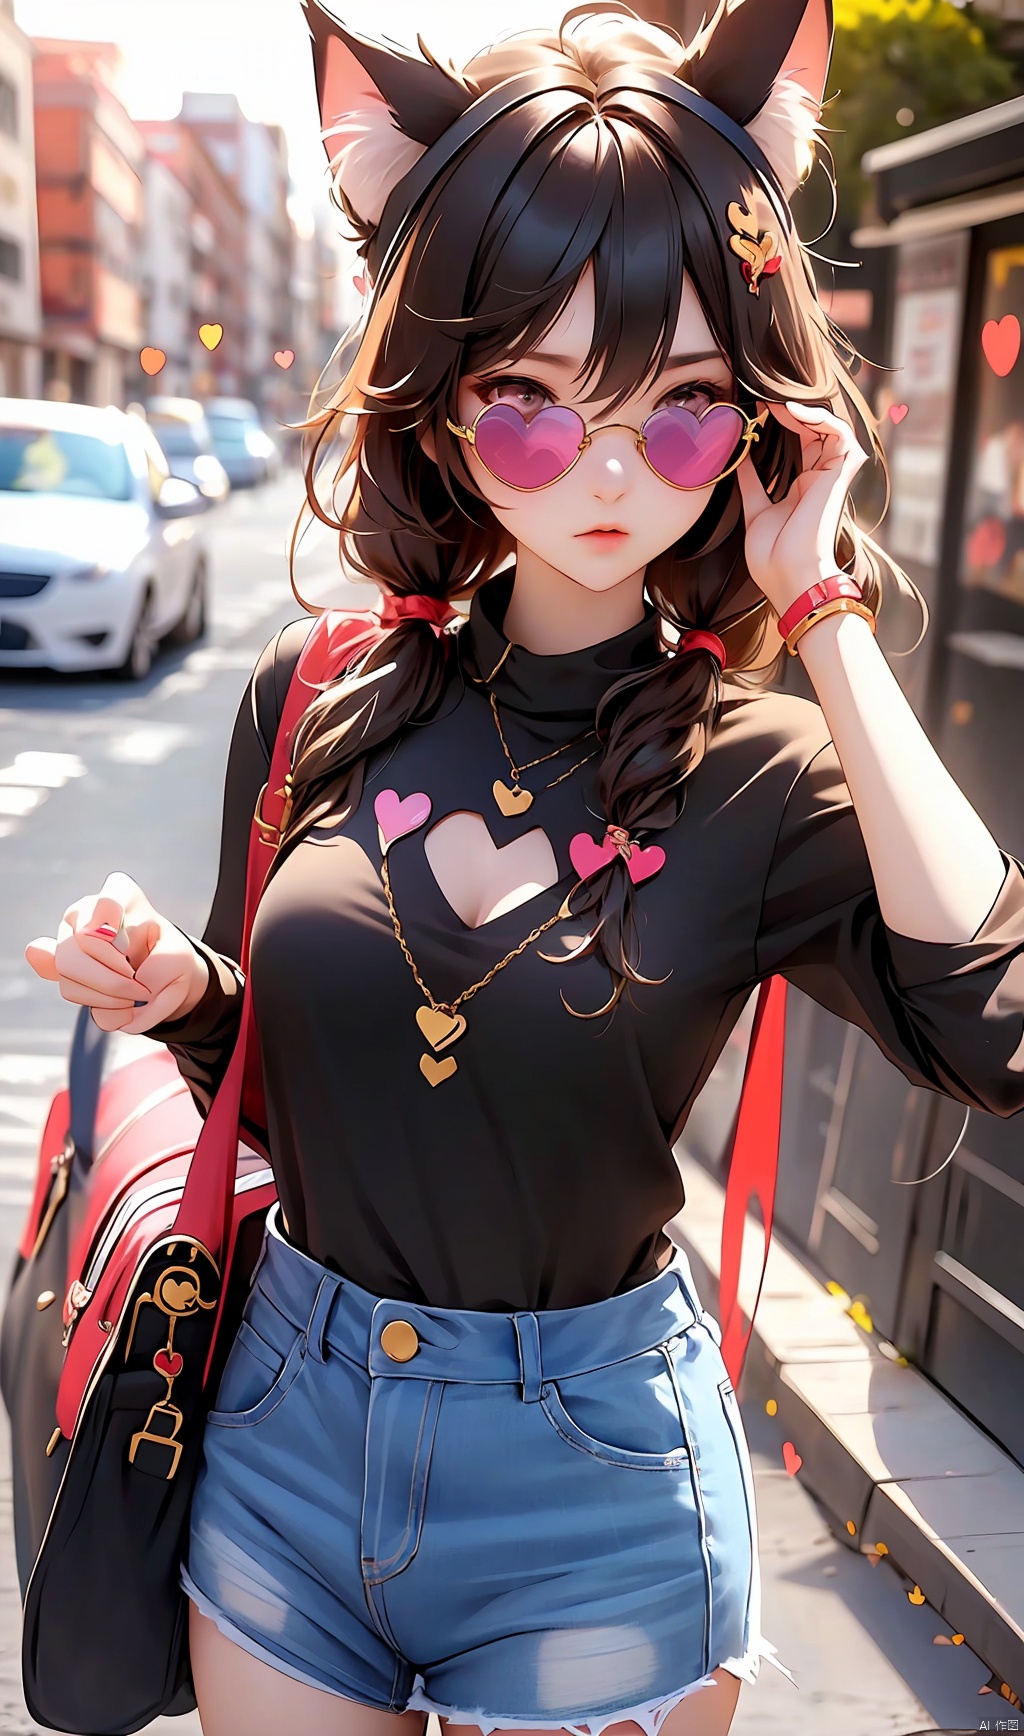  girl only,student,cool ,asian,pretty,cute,
mystical,magical,heart-shaped 1sunglass,cat ears only, Animal ear